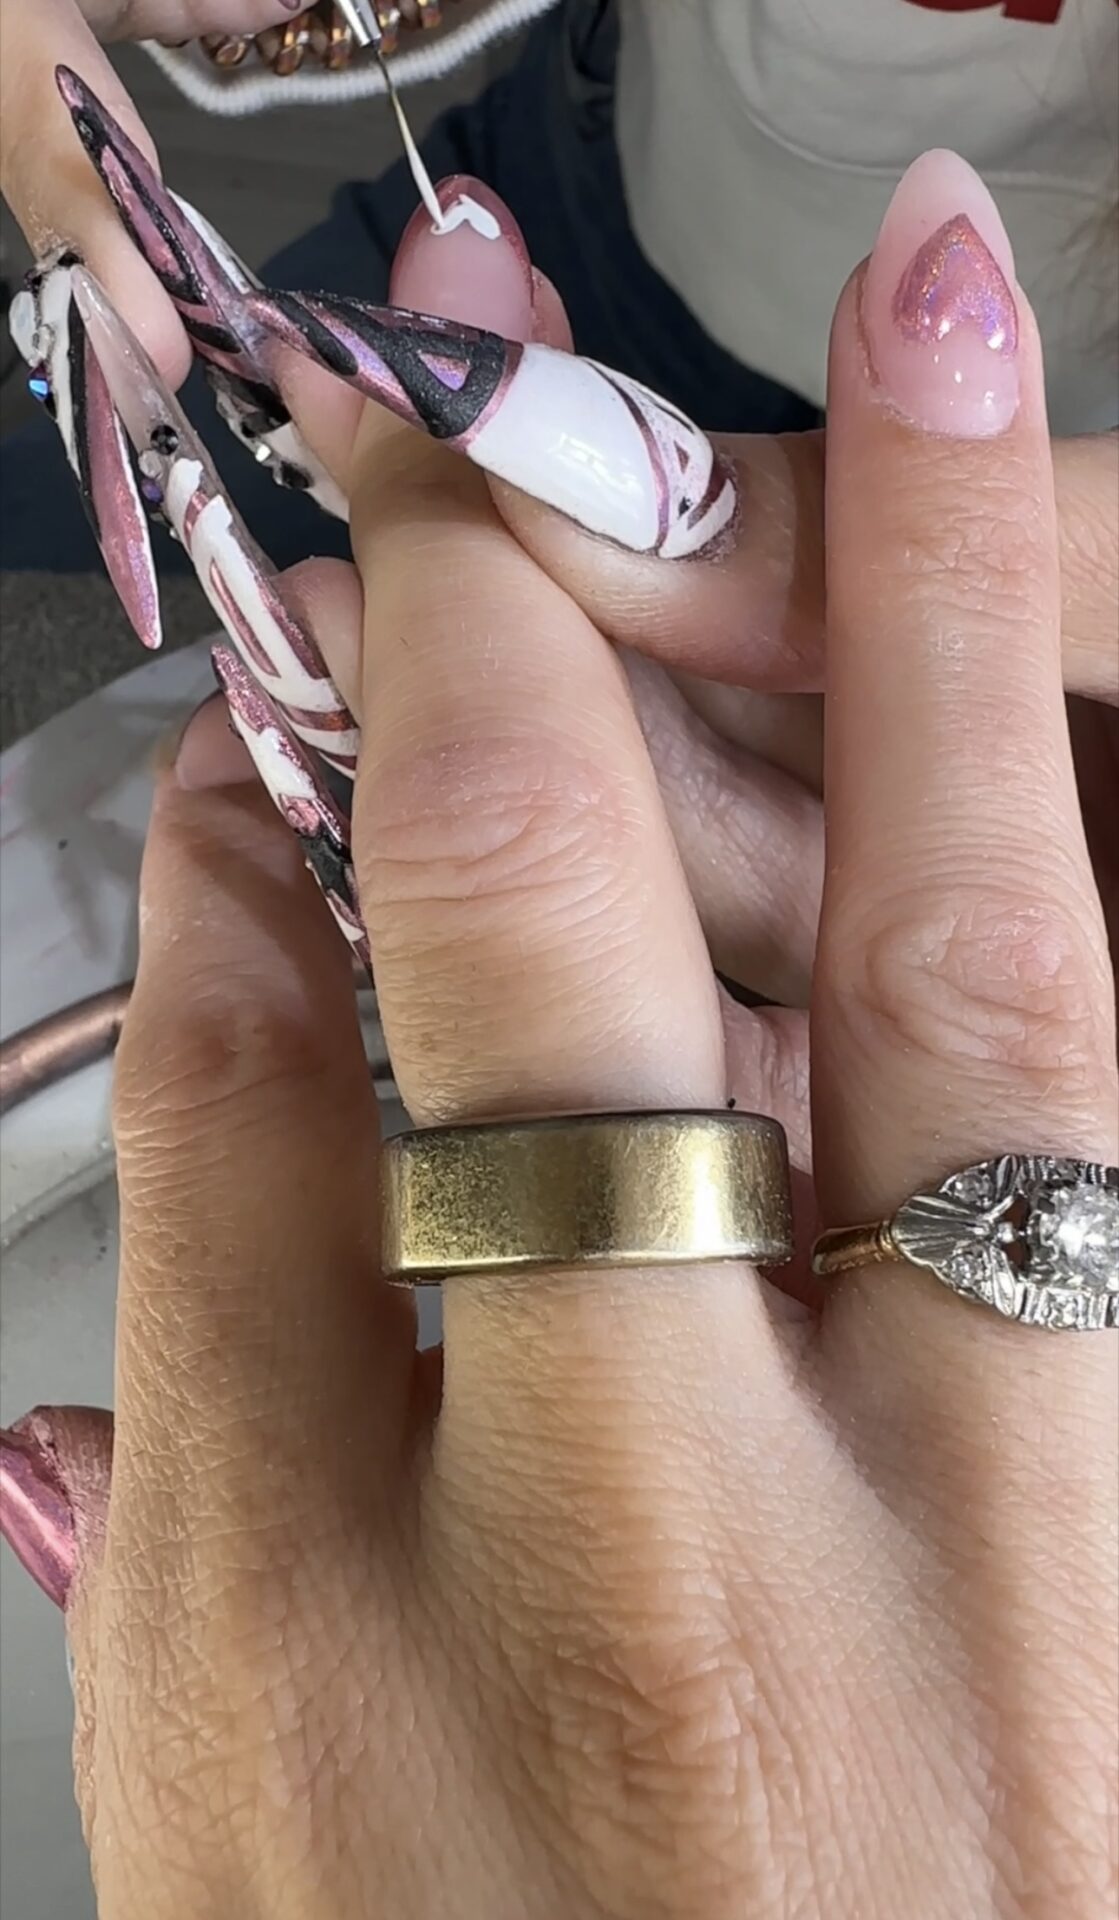 Which is worth your money? Oura Ring Vs. Fitbit. Testing out viral fitness tracking devices to see how they measure up by lifestyle blogger Angela Lanter